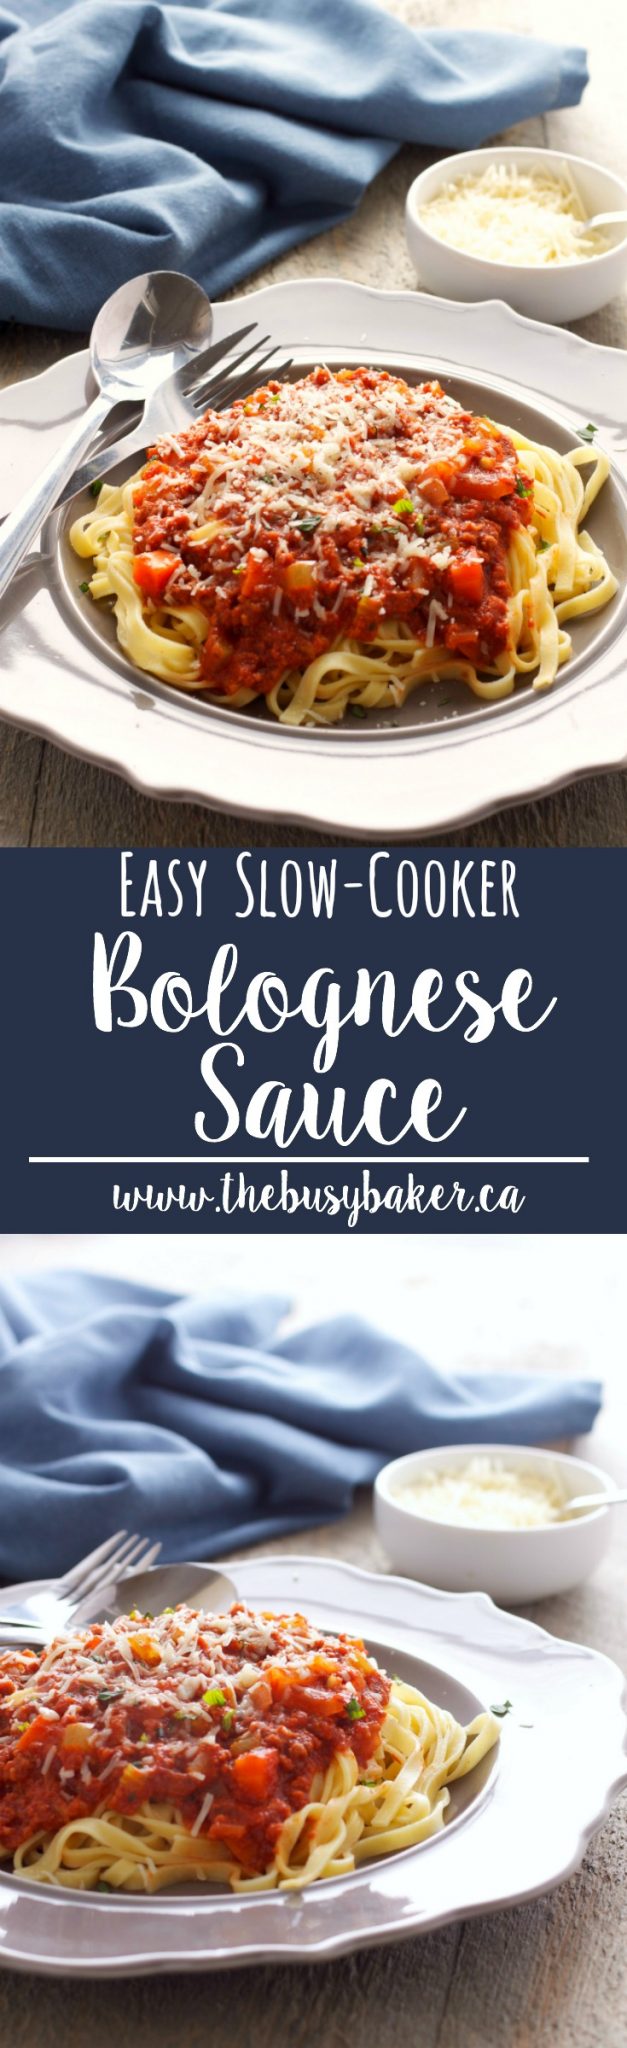 This Slow Cooker Bolognese Sauce is a healthy, vegetable-packed meat sauce that makes the perfect easy family meal over your favorite pasta. via @busybakerblog